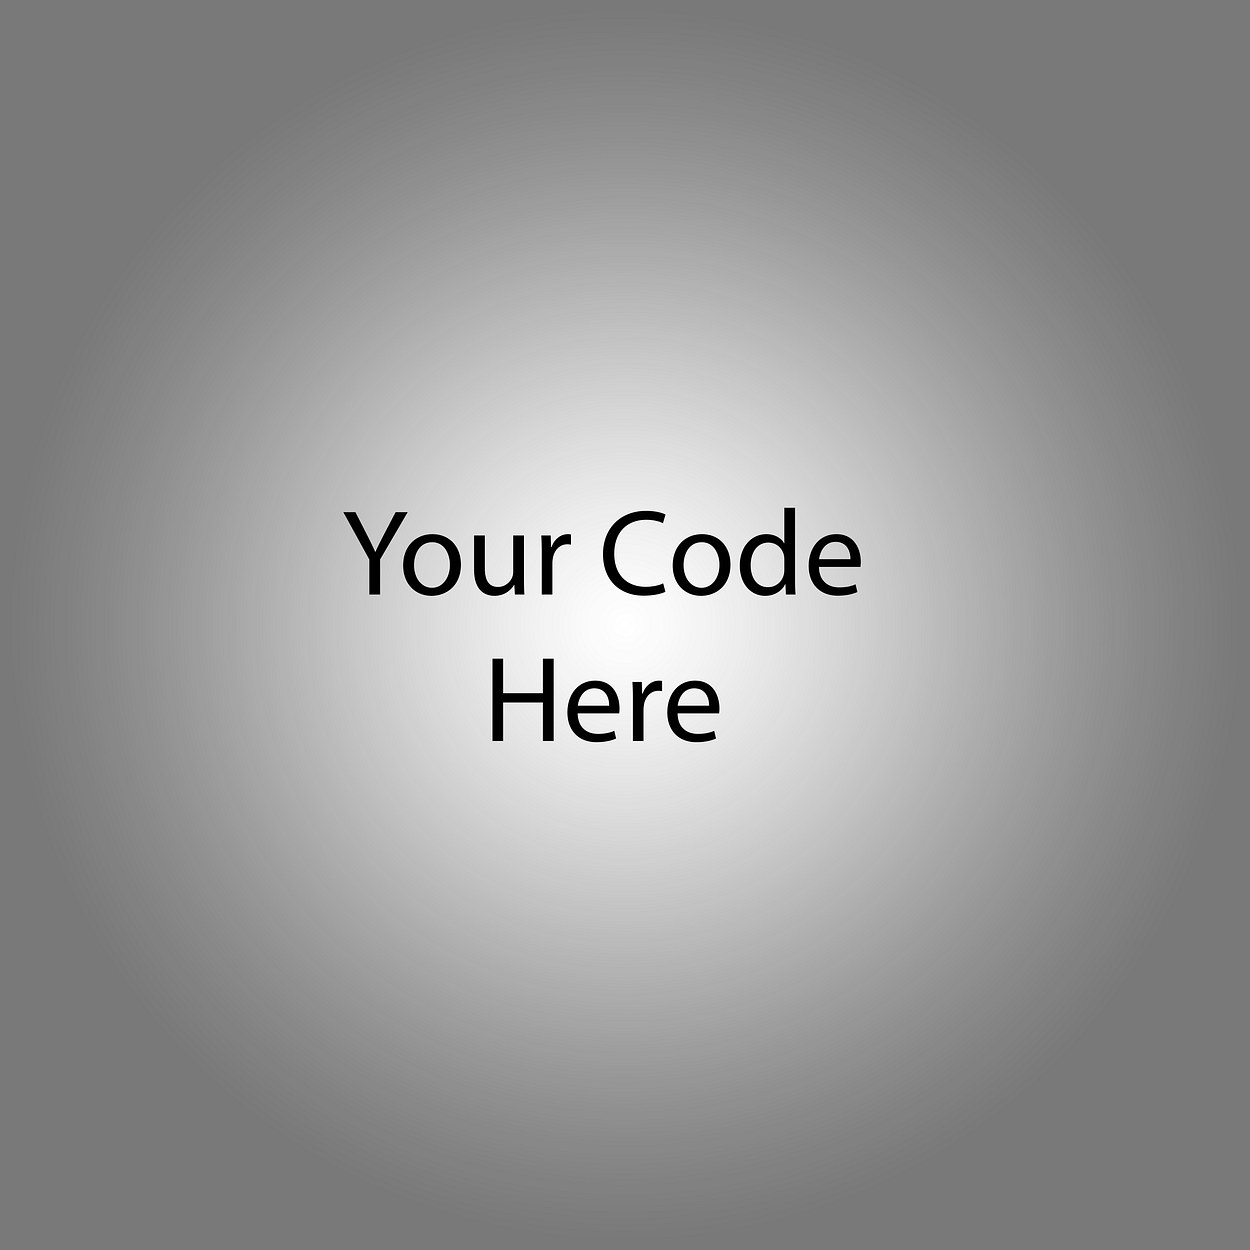 Your Code Here